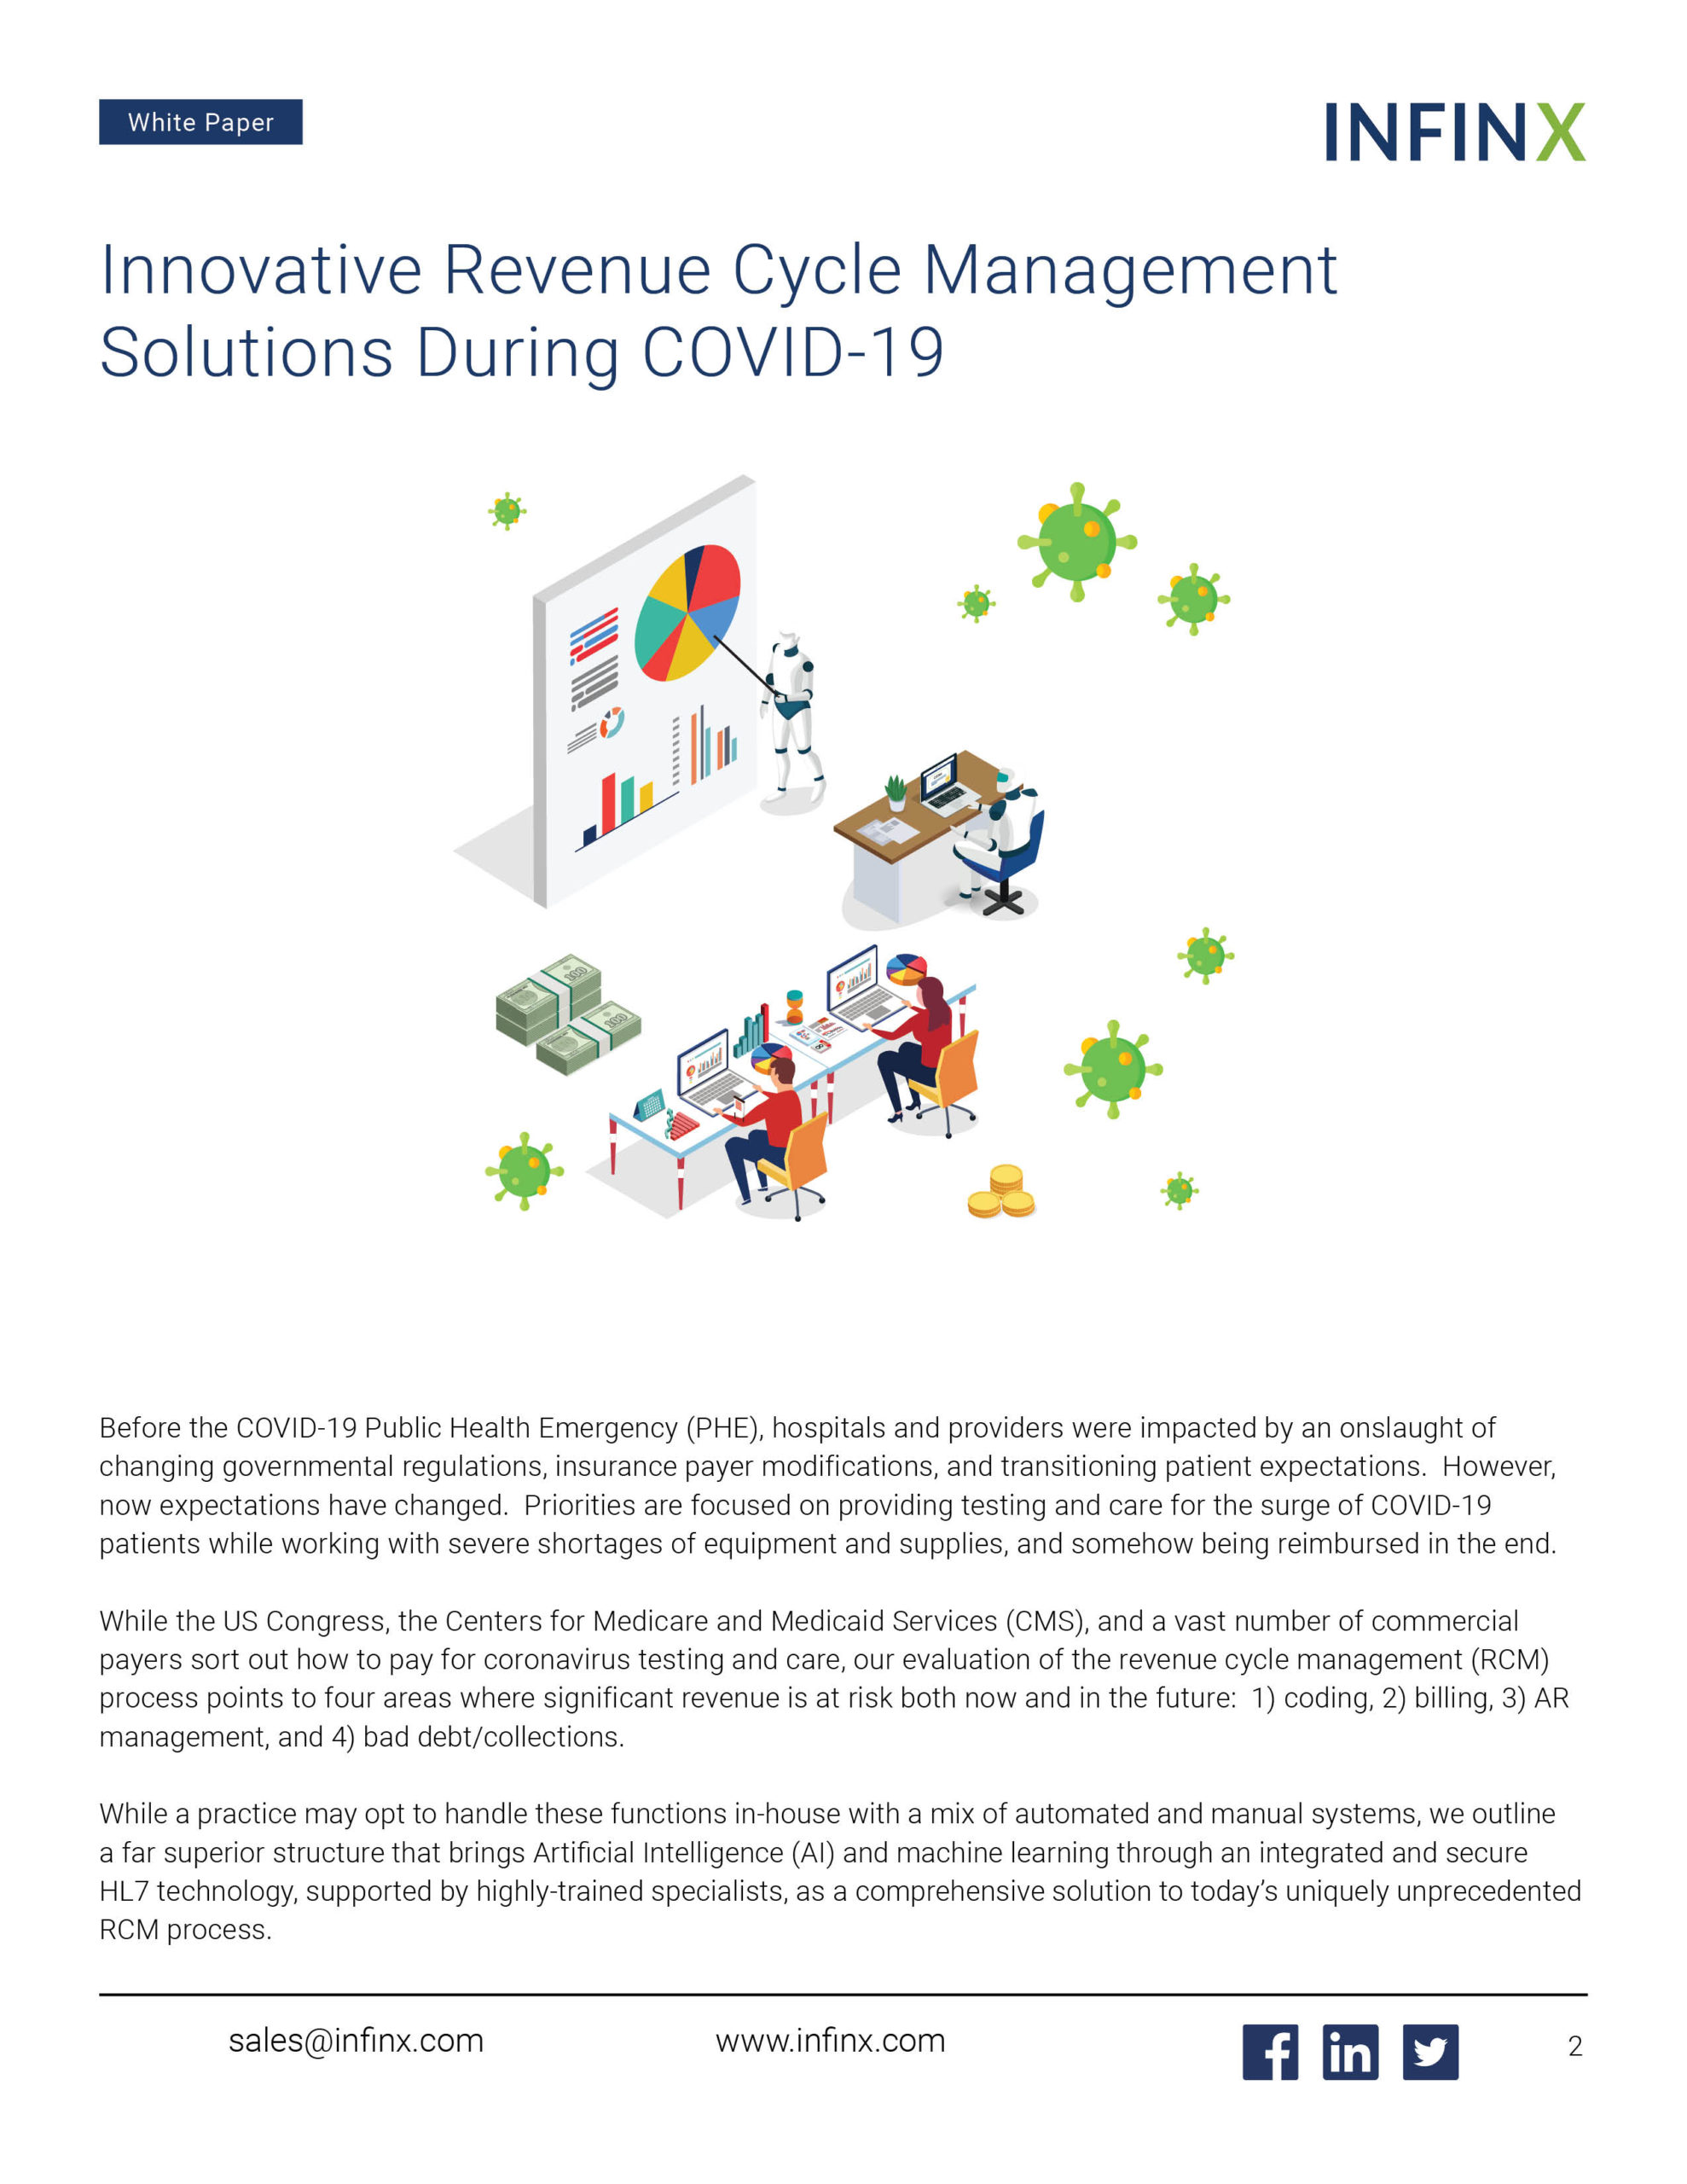 Infinx - White Paper - Innovative Revenue Cycle Management Solutions During COVID-19 June2021 2